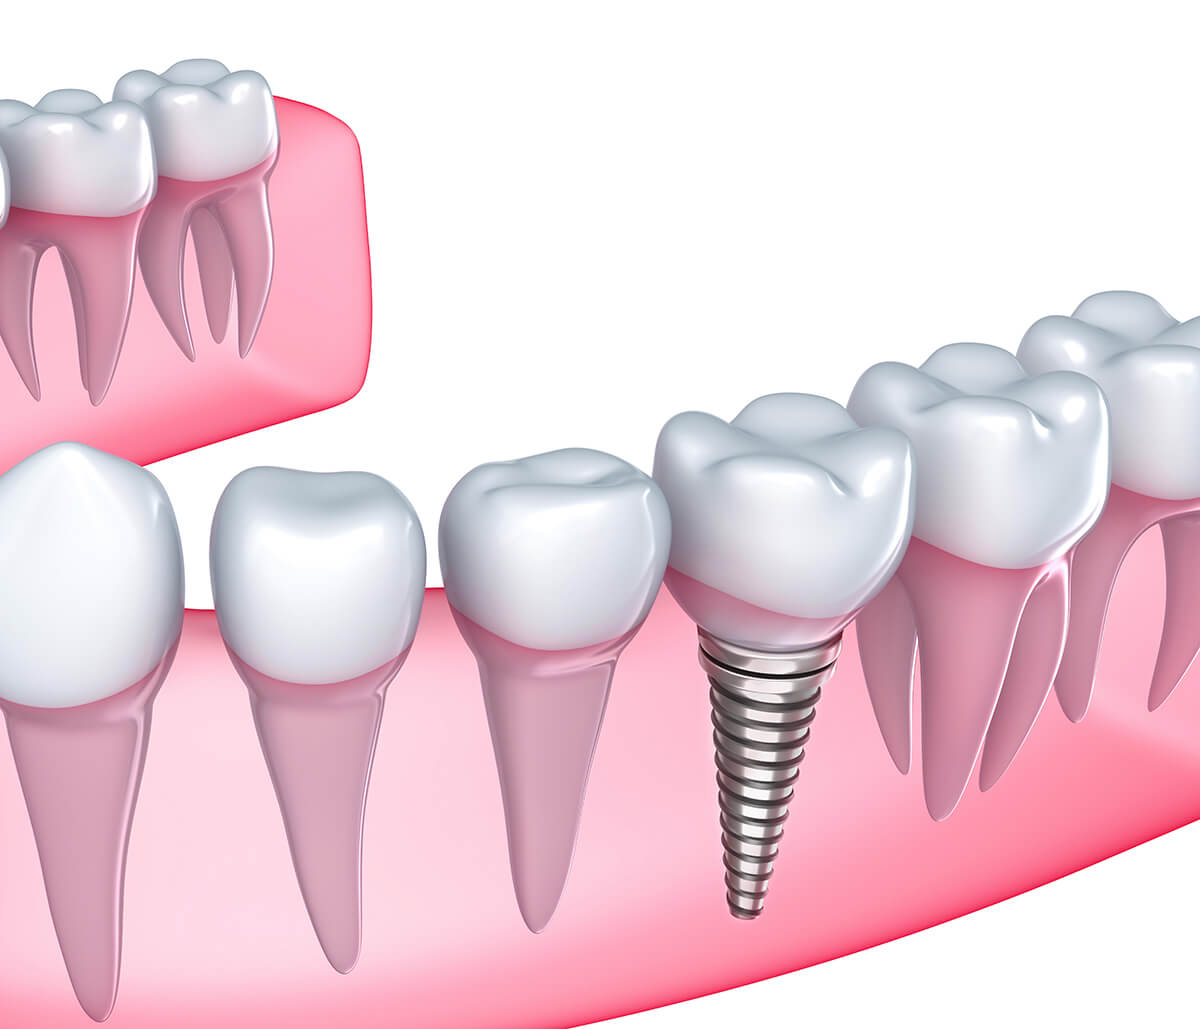 Rebuild Your Smile with Dental Implant Technology at an Advanced Dentist Office in Turlock, CA Area